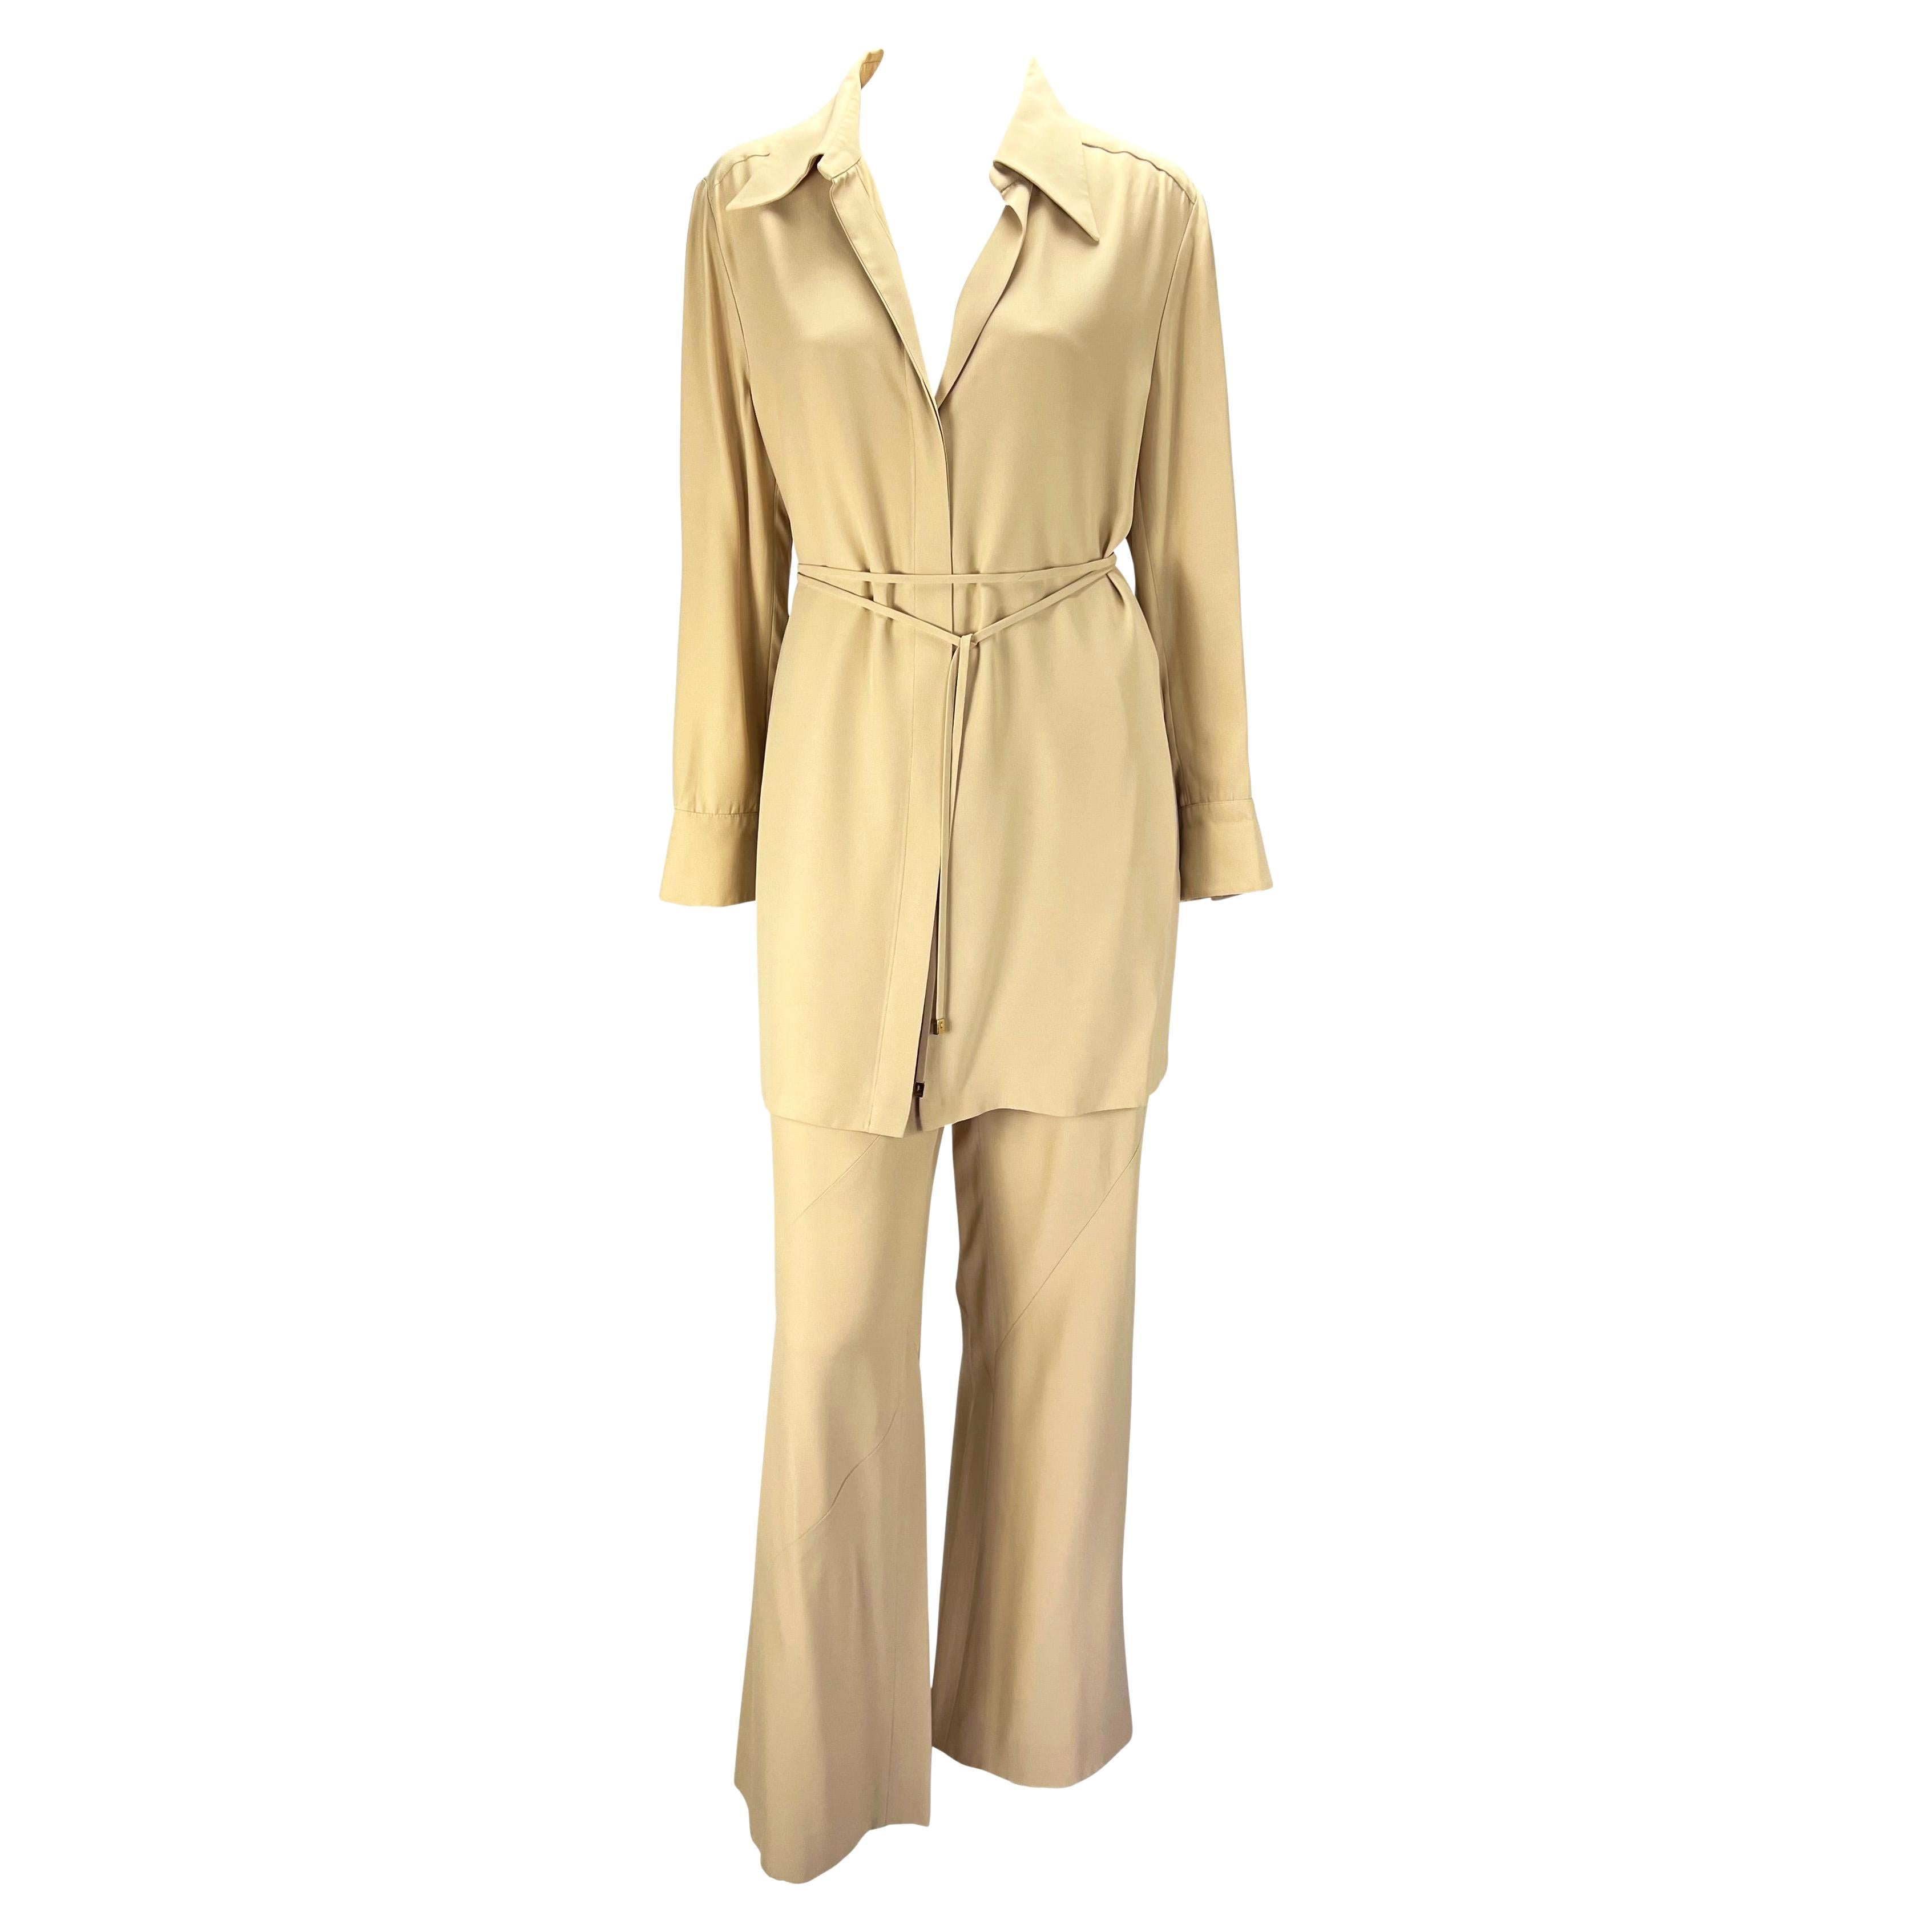 S/S 1997 Gucci by Tom Ford Beige Asymmetric Panel Wide Leg Belted Pantsuit  For Sale